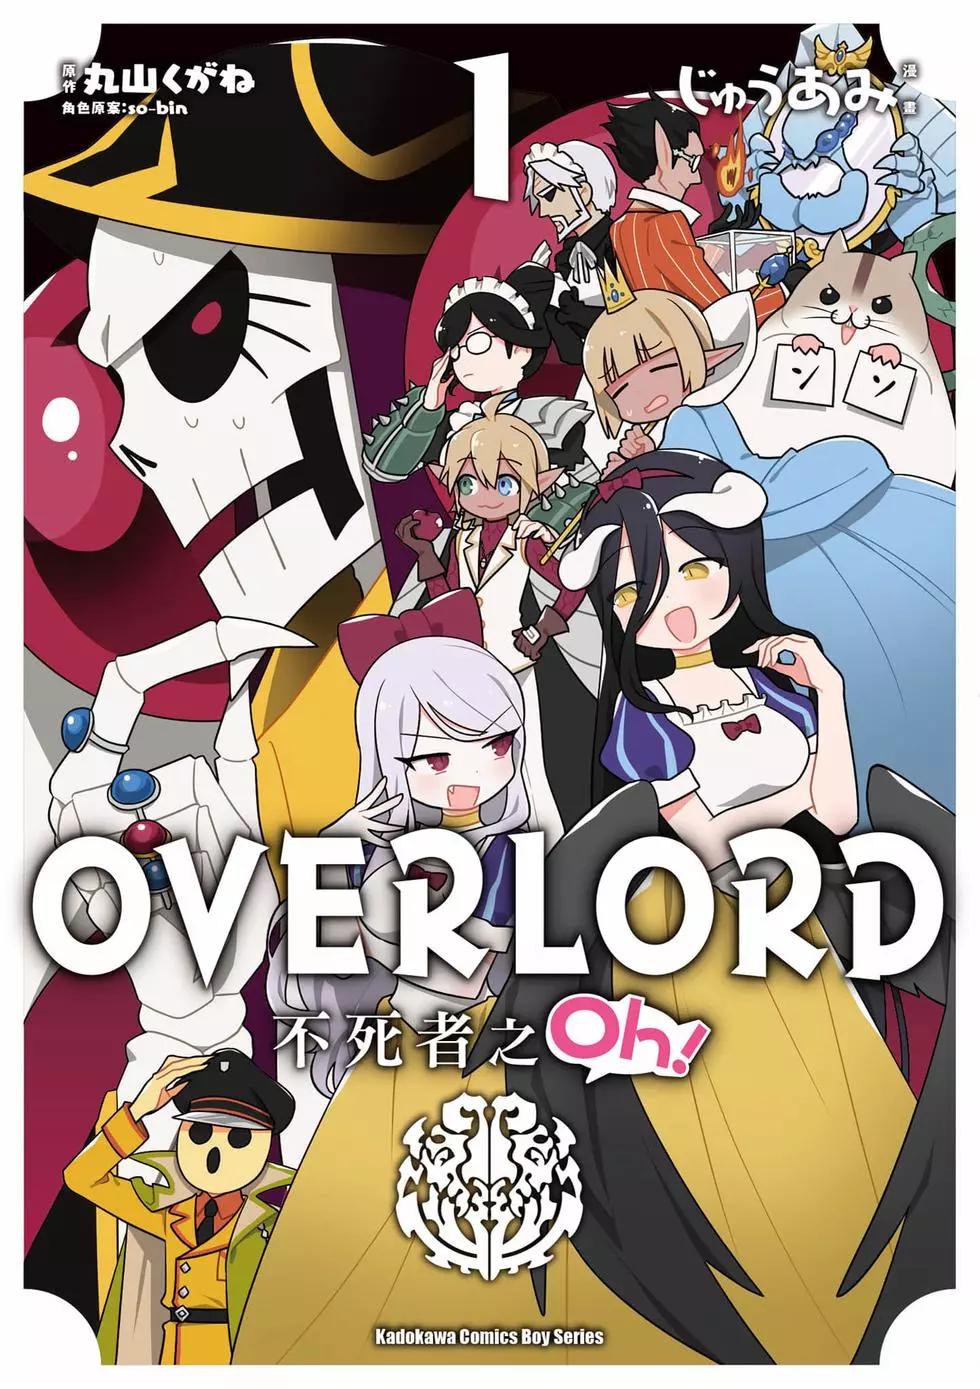 Overlord不死者之OH！ - 第01卷(1/3) - 1